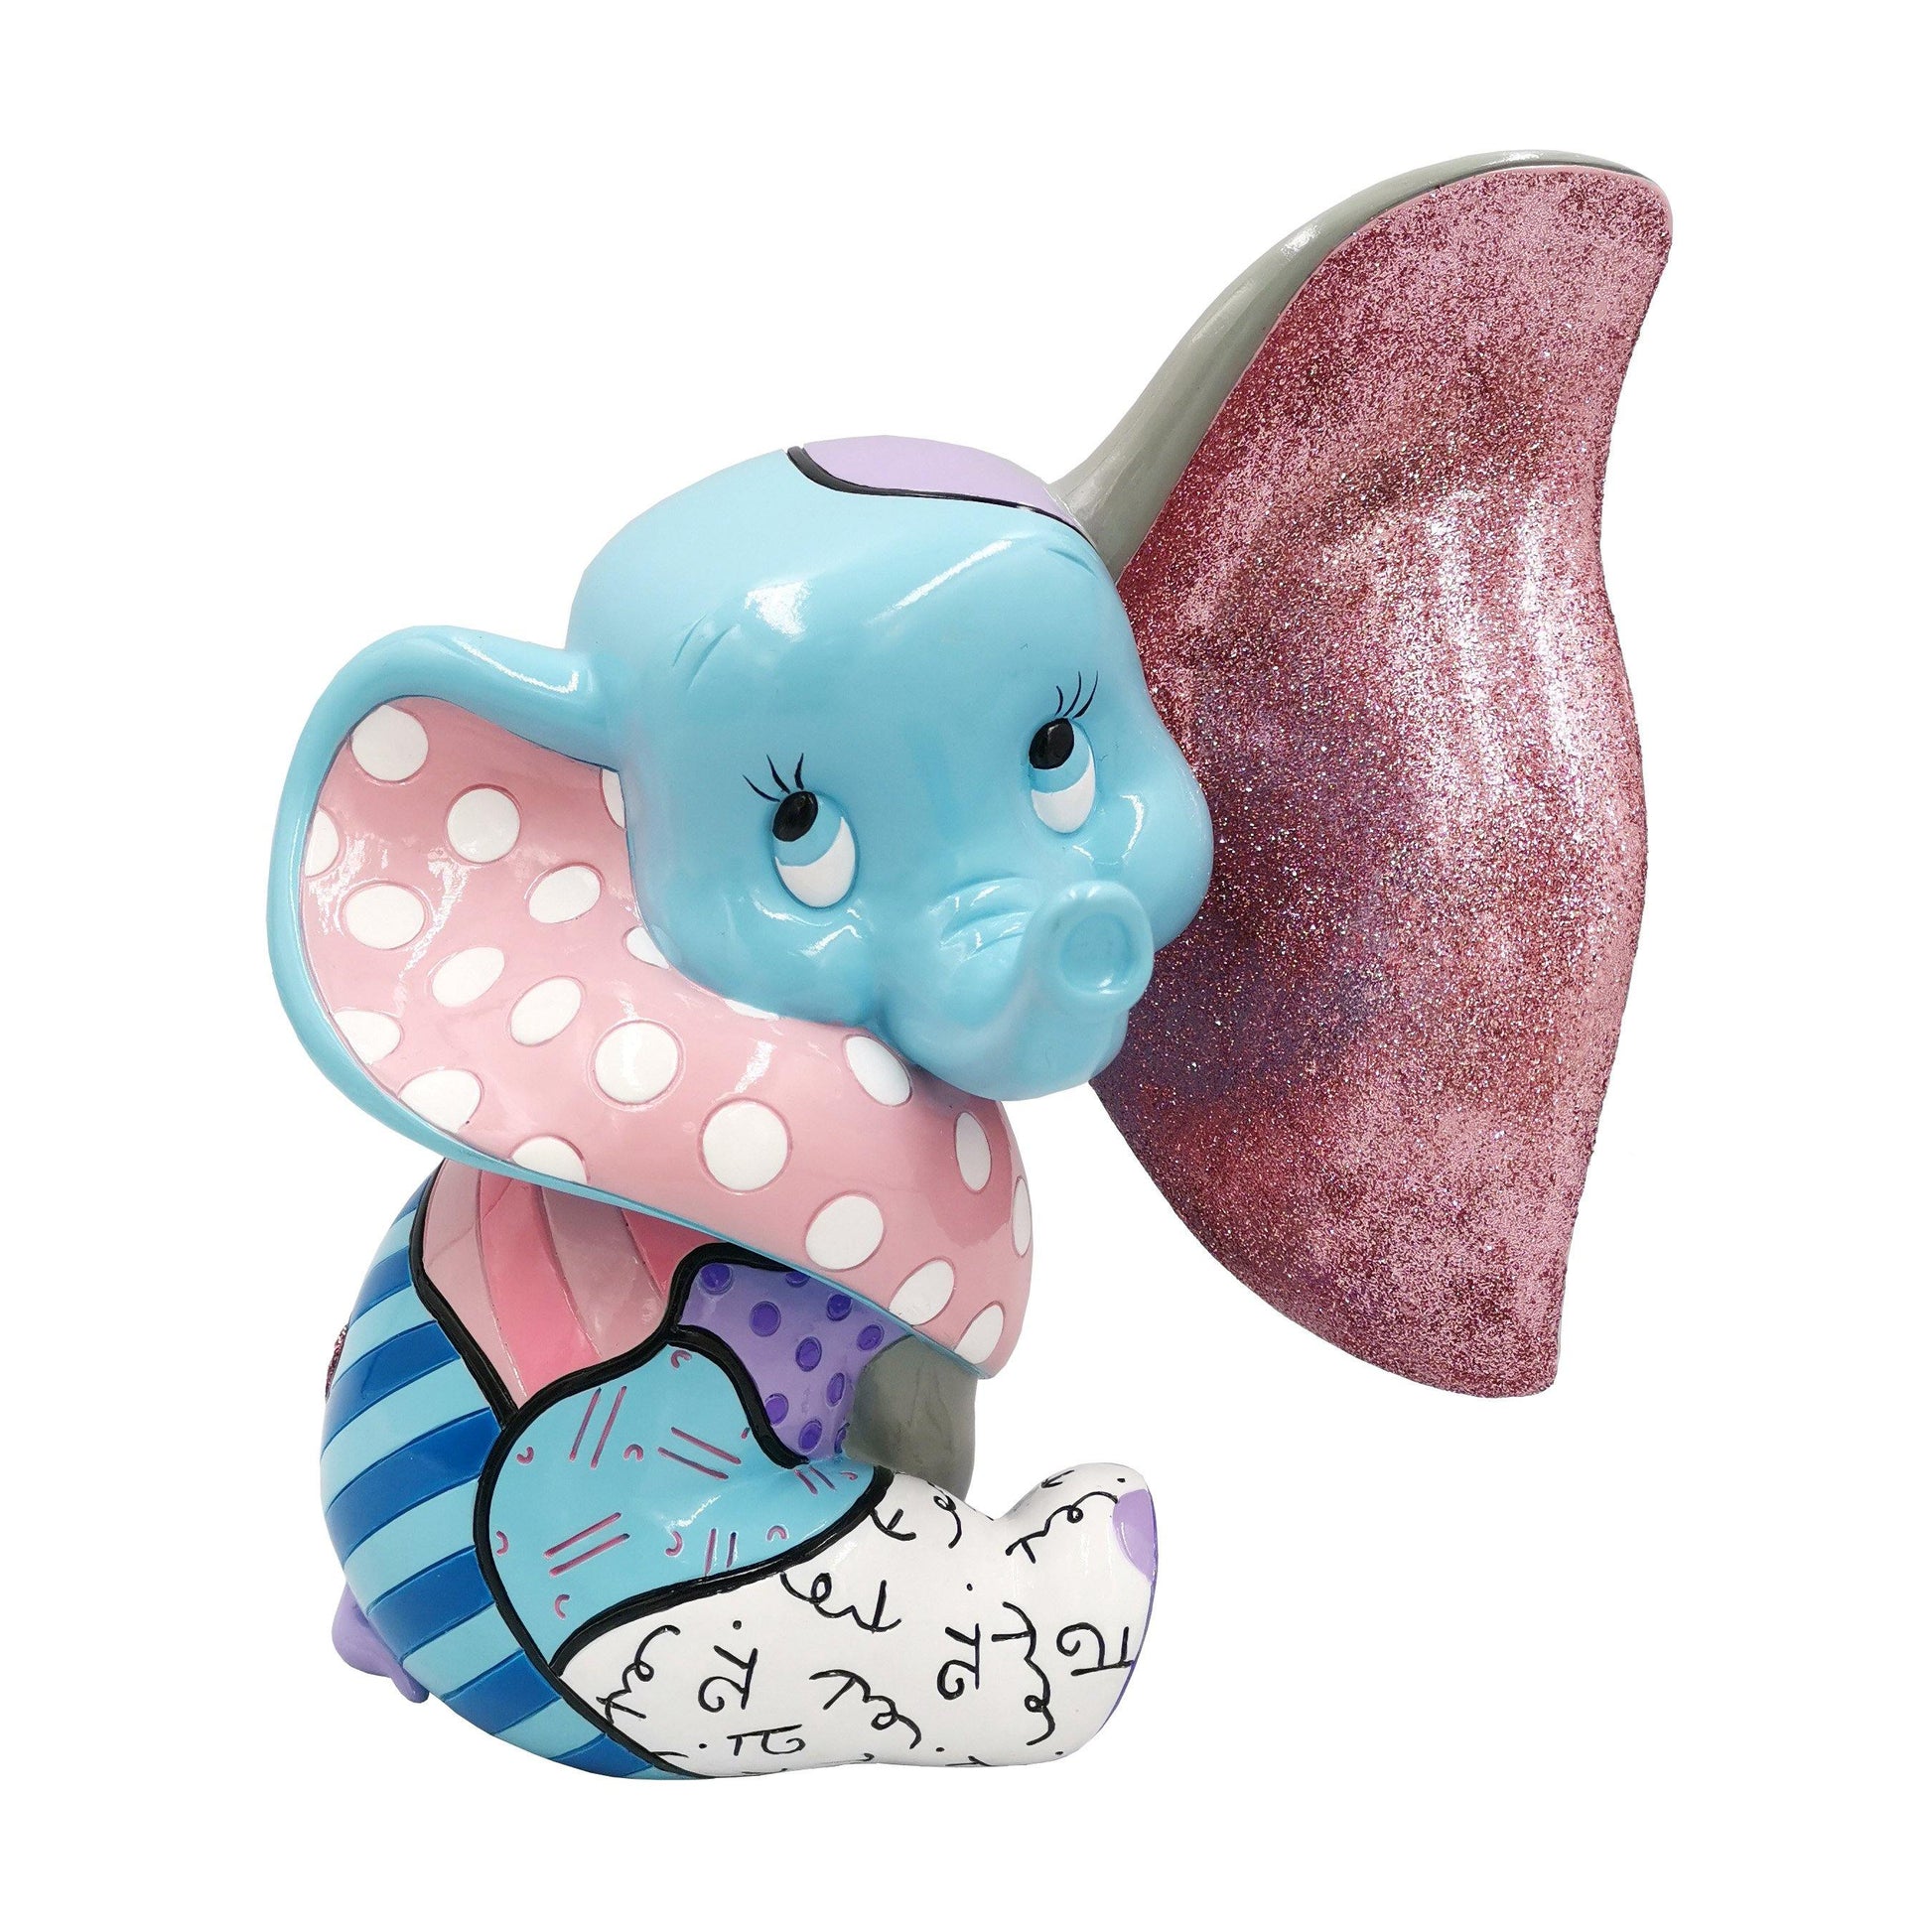 Baby Dumbo Figurine (Disney Britto Collection) - Gallery Gifts Online 